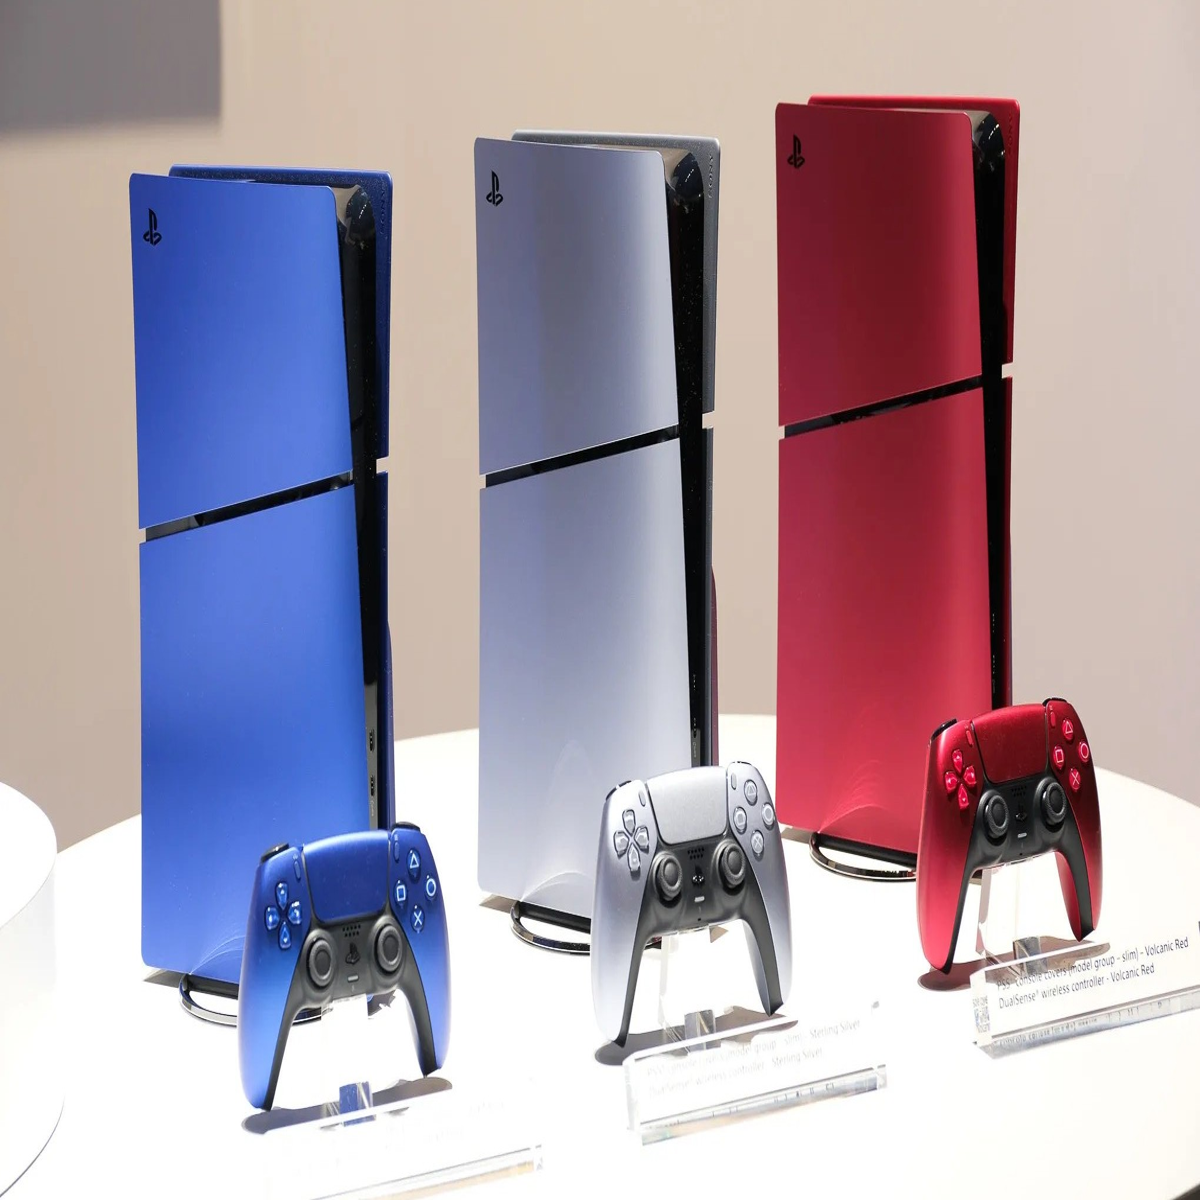 All Deep Earth Colors for PS5 Controllers and Console Covers Are